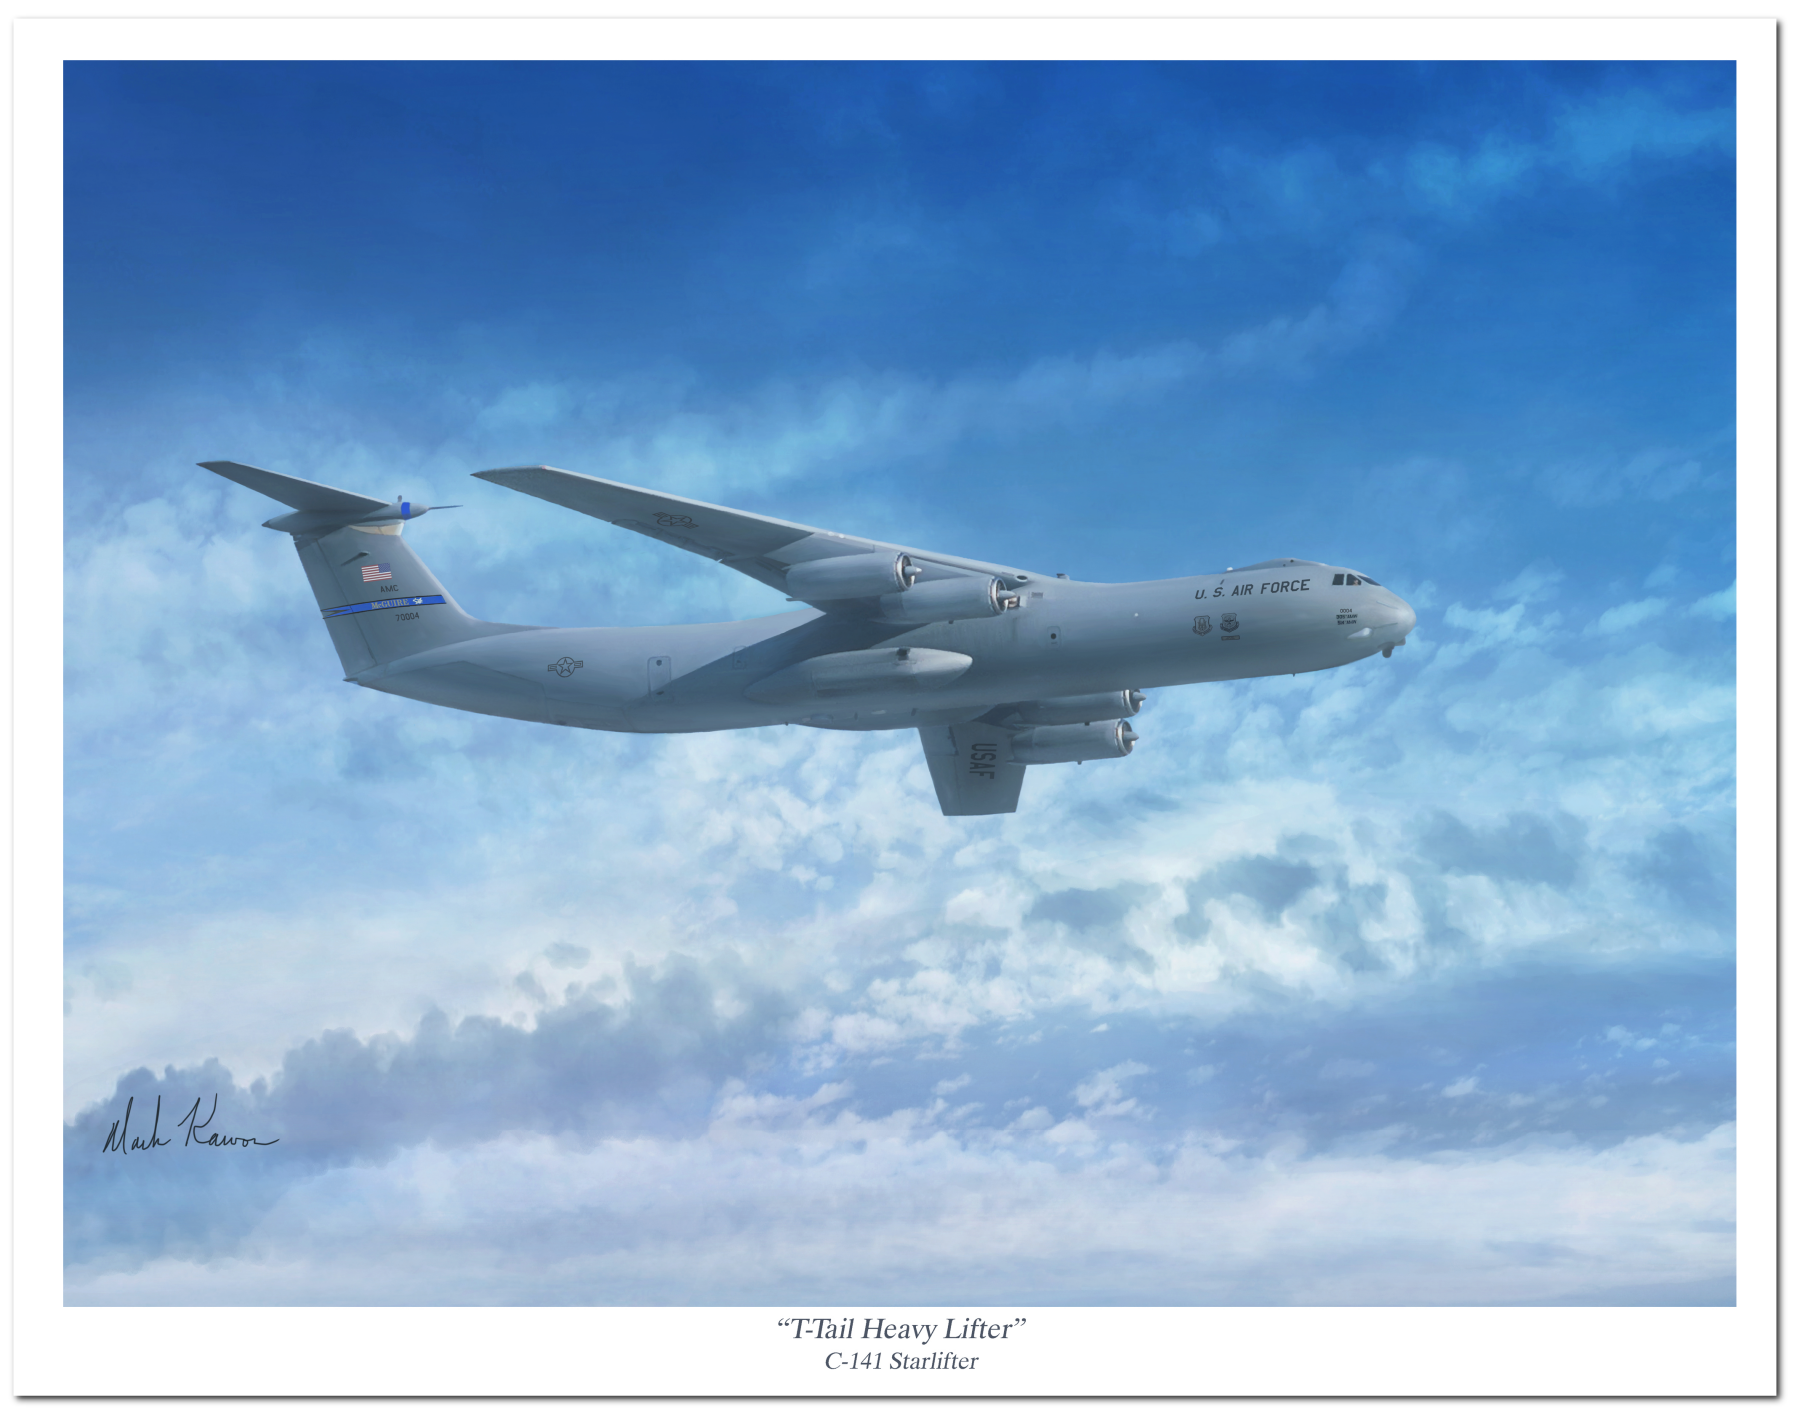 "T-Tail Heavy Lifter" by Mark Karvon, featuring the C-141B Starlifter